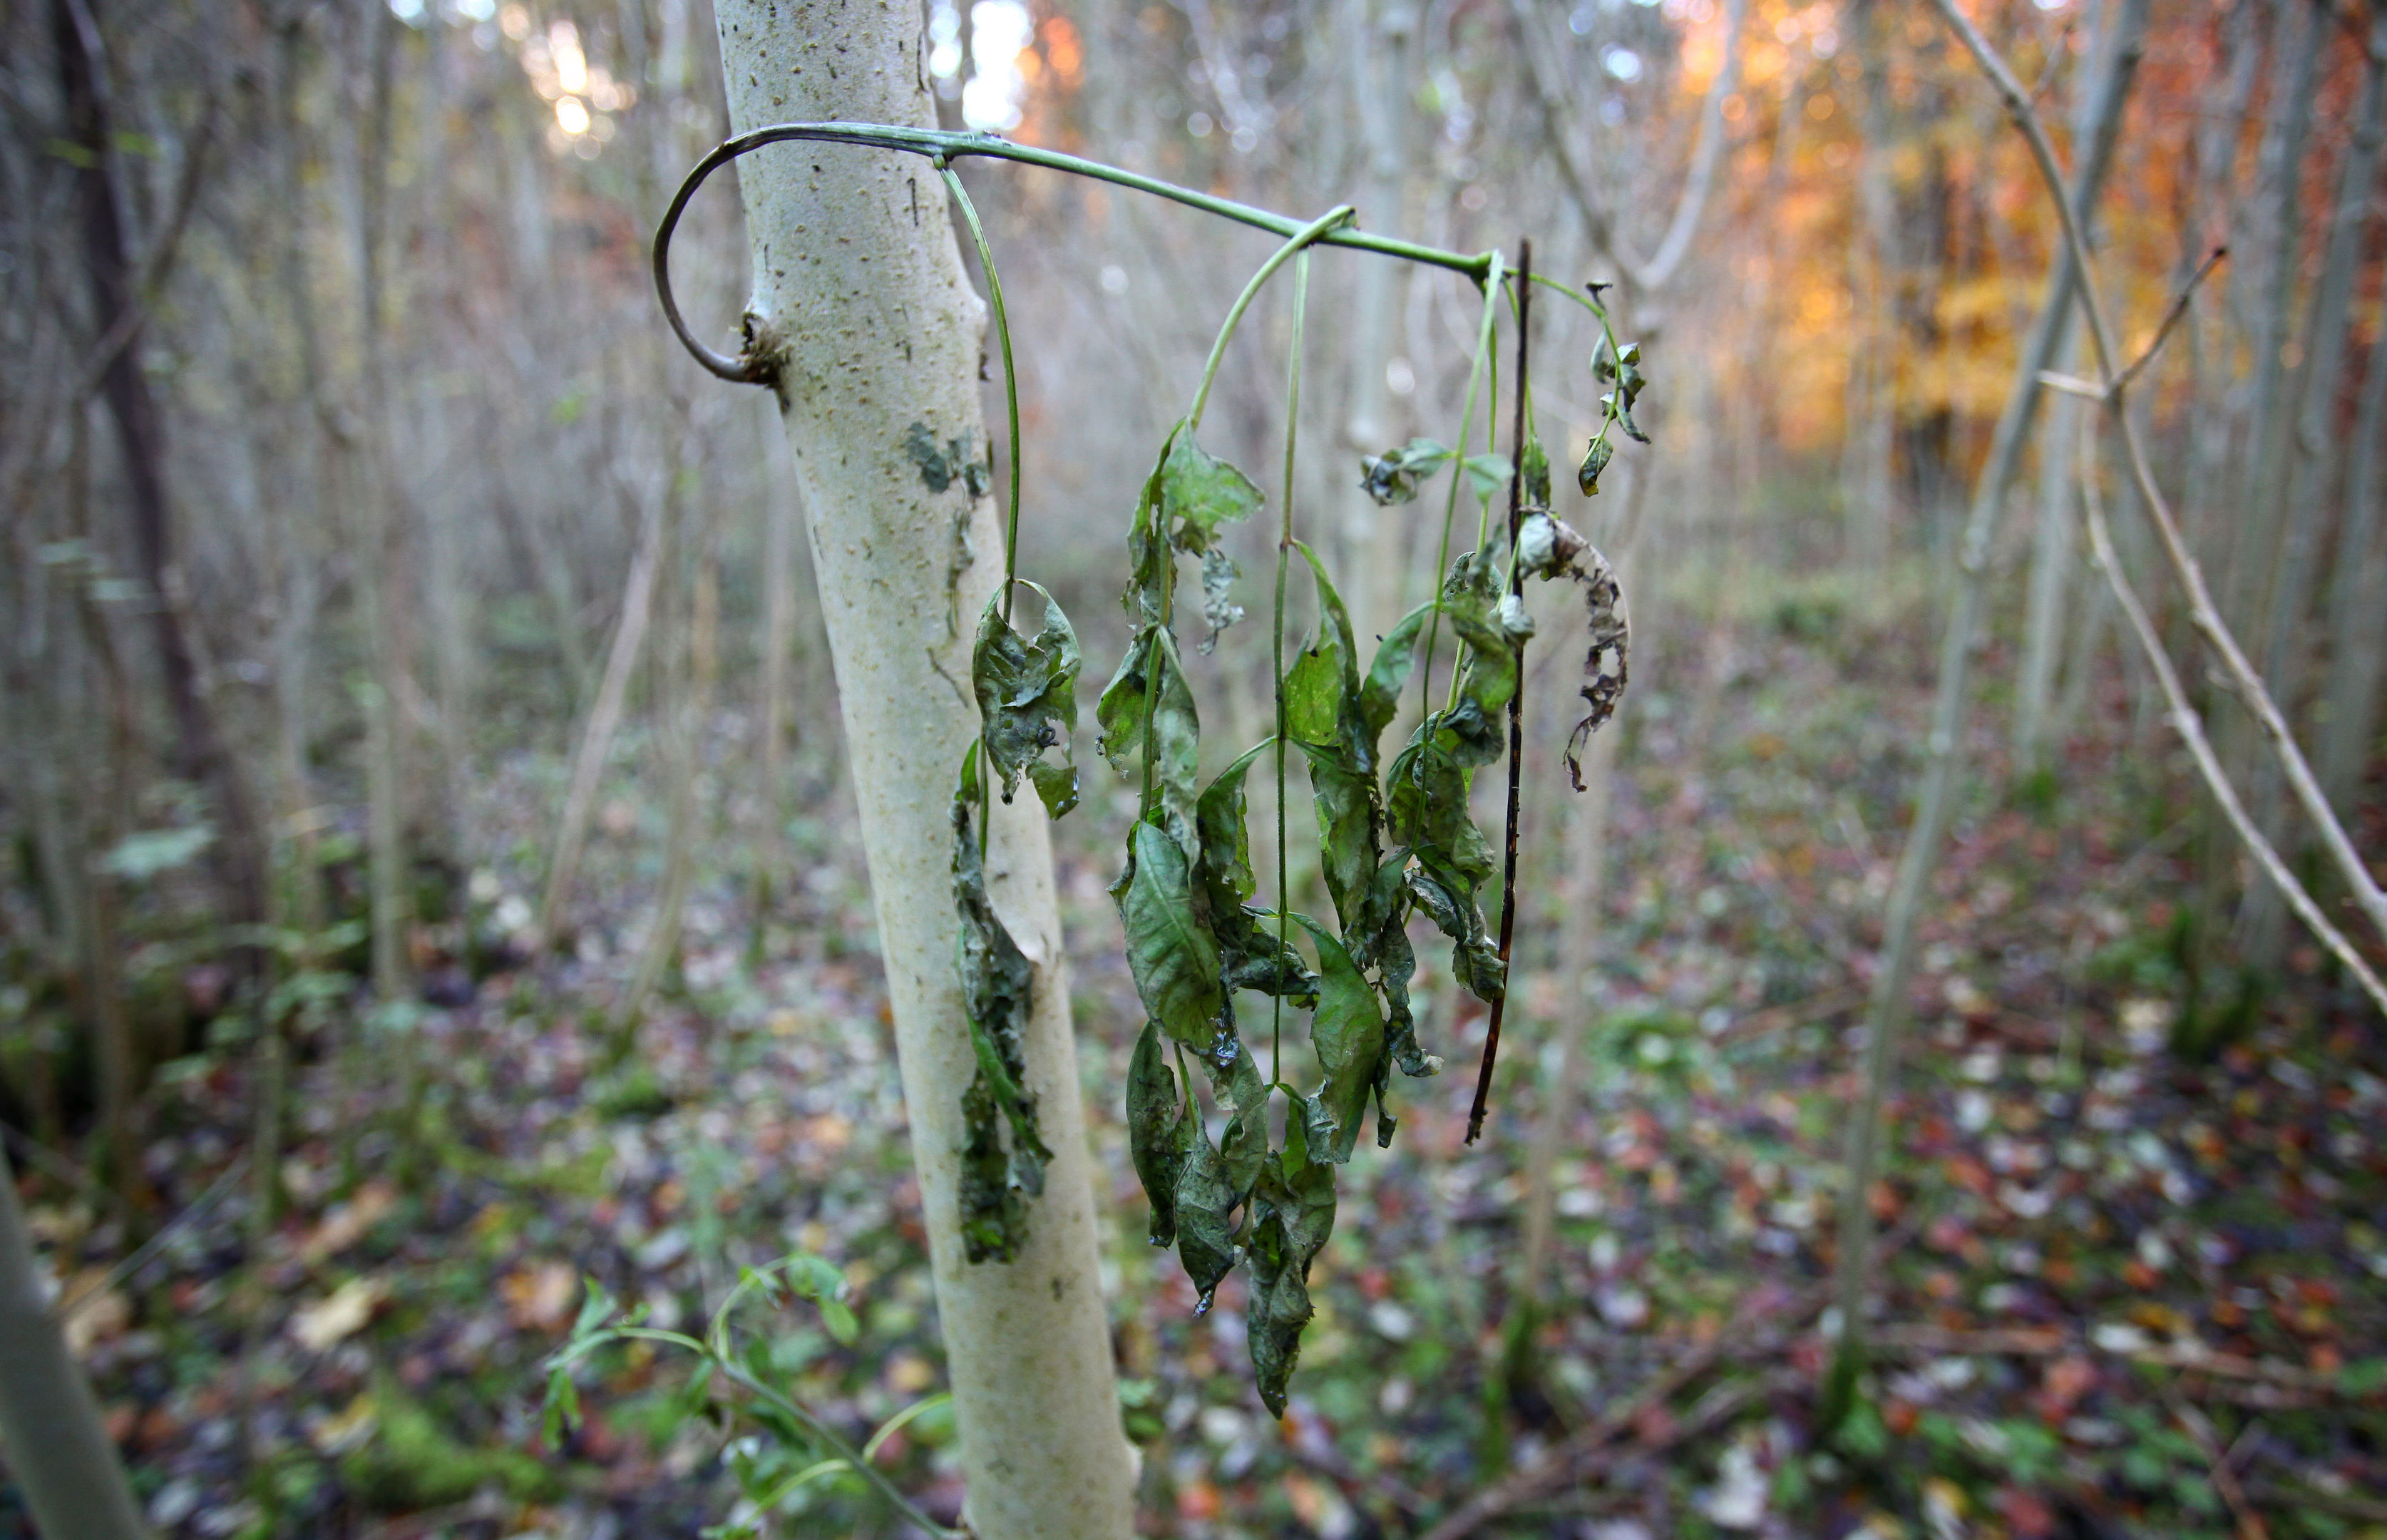 A common ash tree with wilting leaves shows the symptoms of ash dieback.